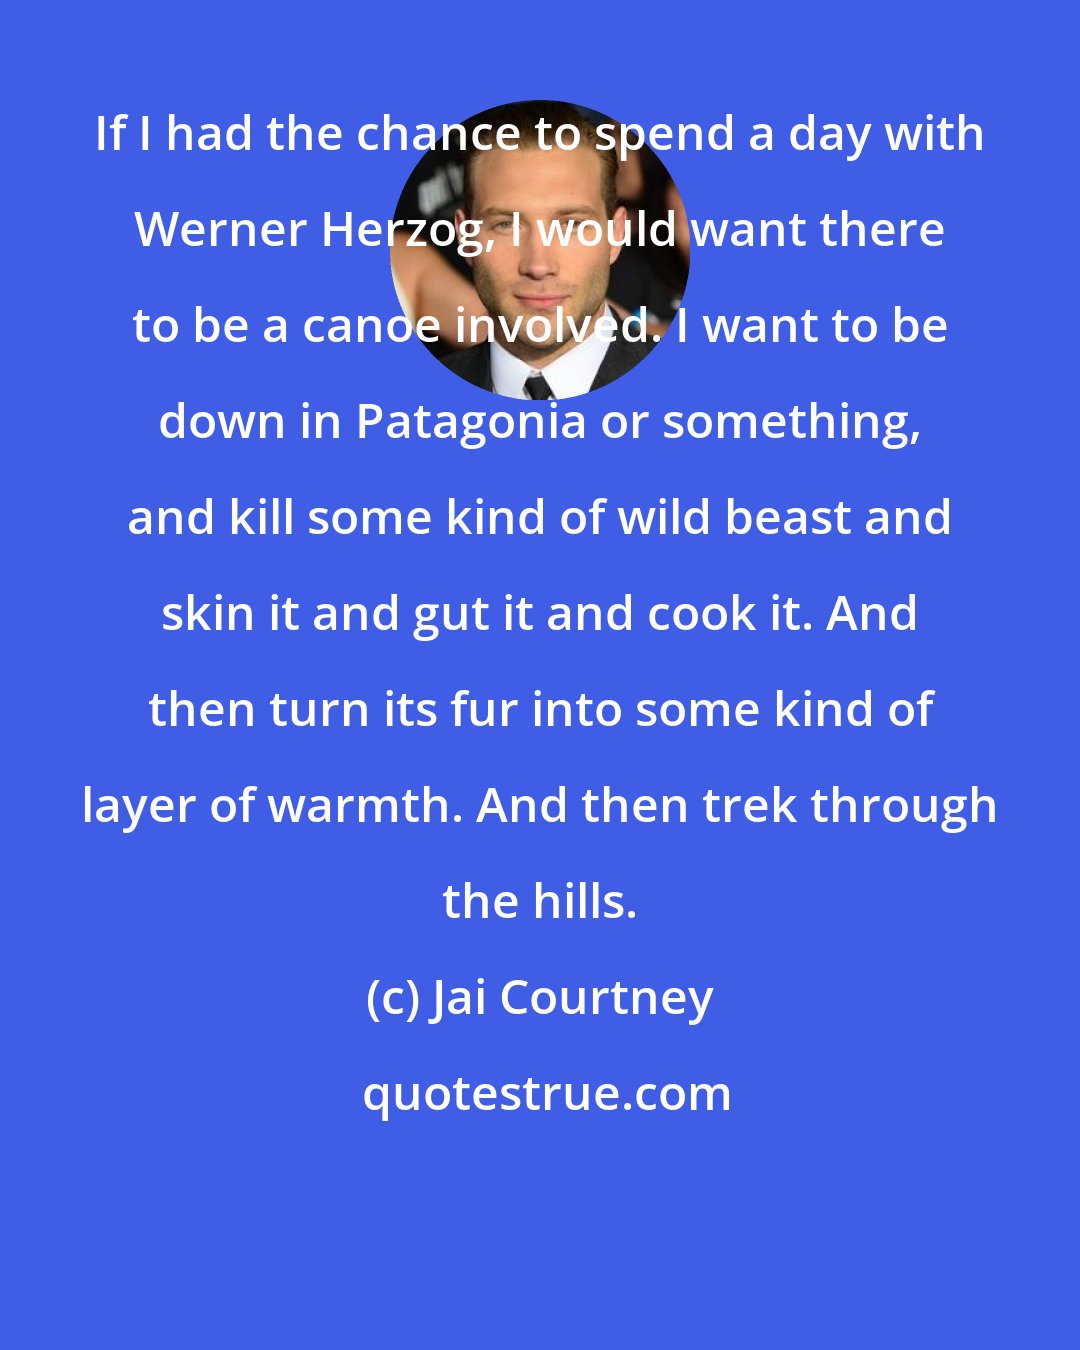 Jai Courtney: If I had the chance to spend a day with Werner Herzog, I would want there to be a canoe involved. I want to be down in Patagonia or something, and kill some kind of wild beast and skin it and gut it and cook it. And then turn its fur into some kind of layer of warmth. And then trek through the hills.